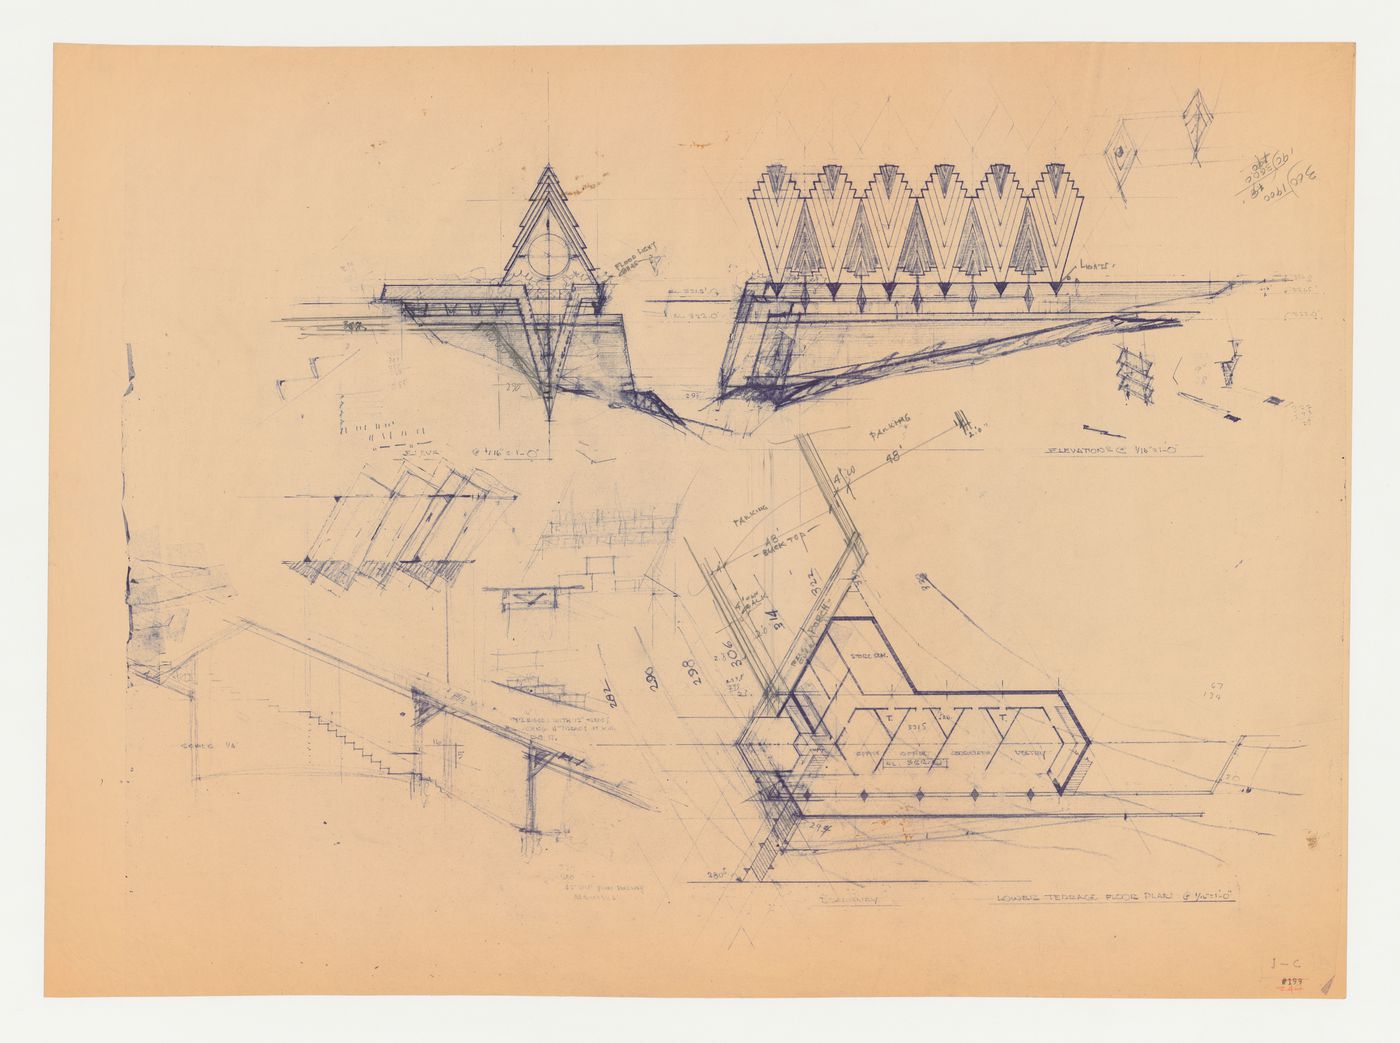 Swedenborg Memorial Chapel, El Cerrito, California: Elevations, plans, and section for the chapel and covered walkway